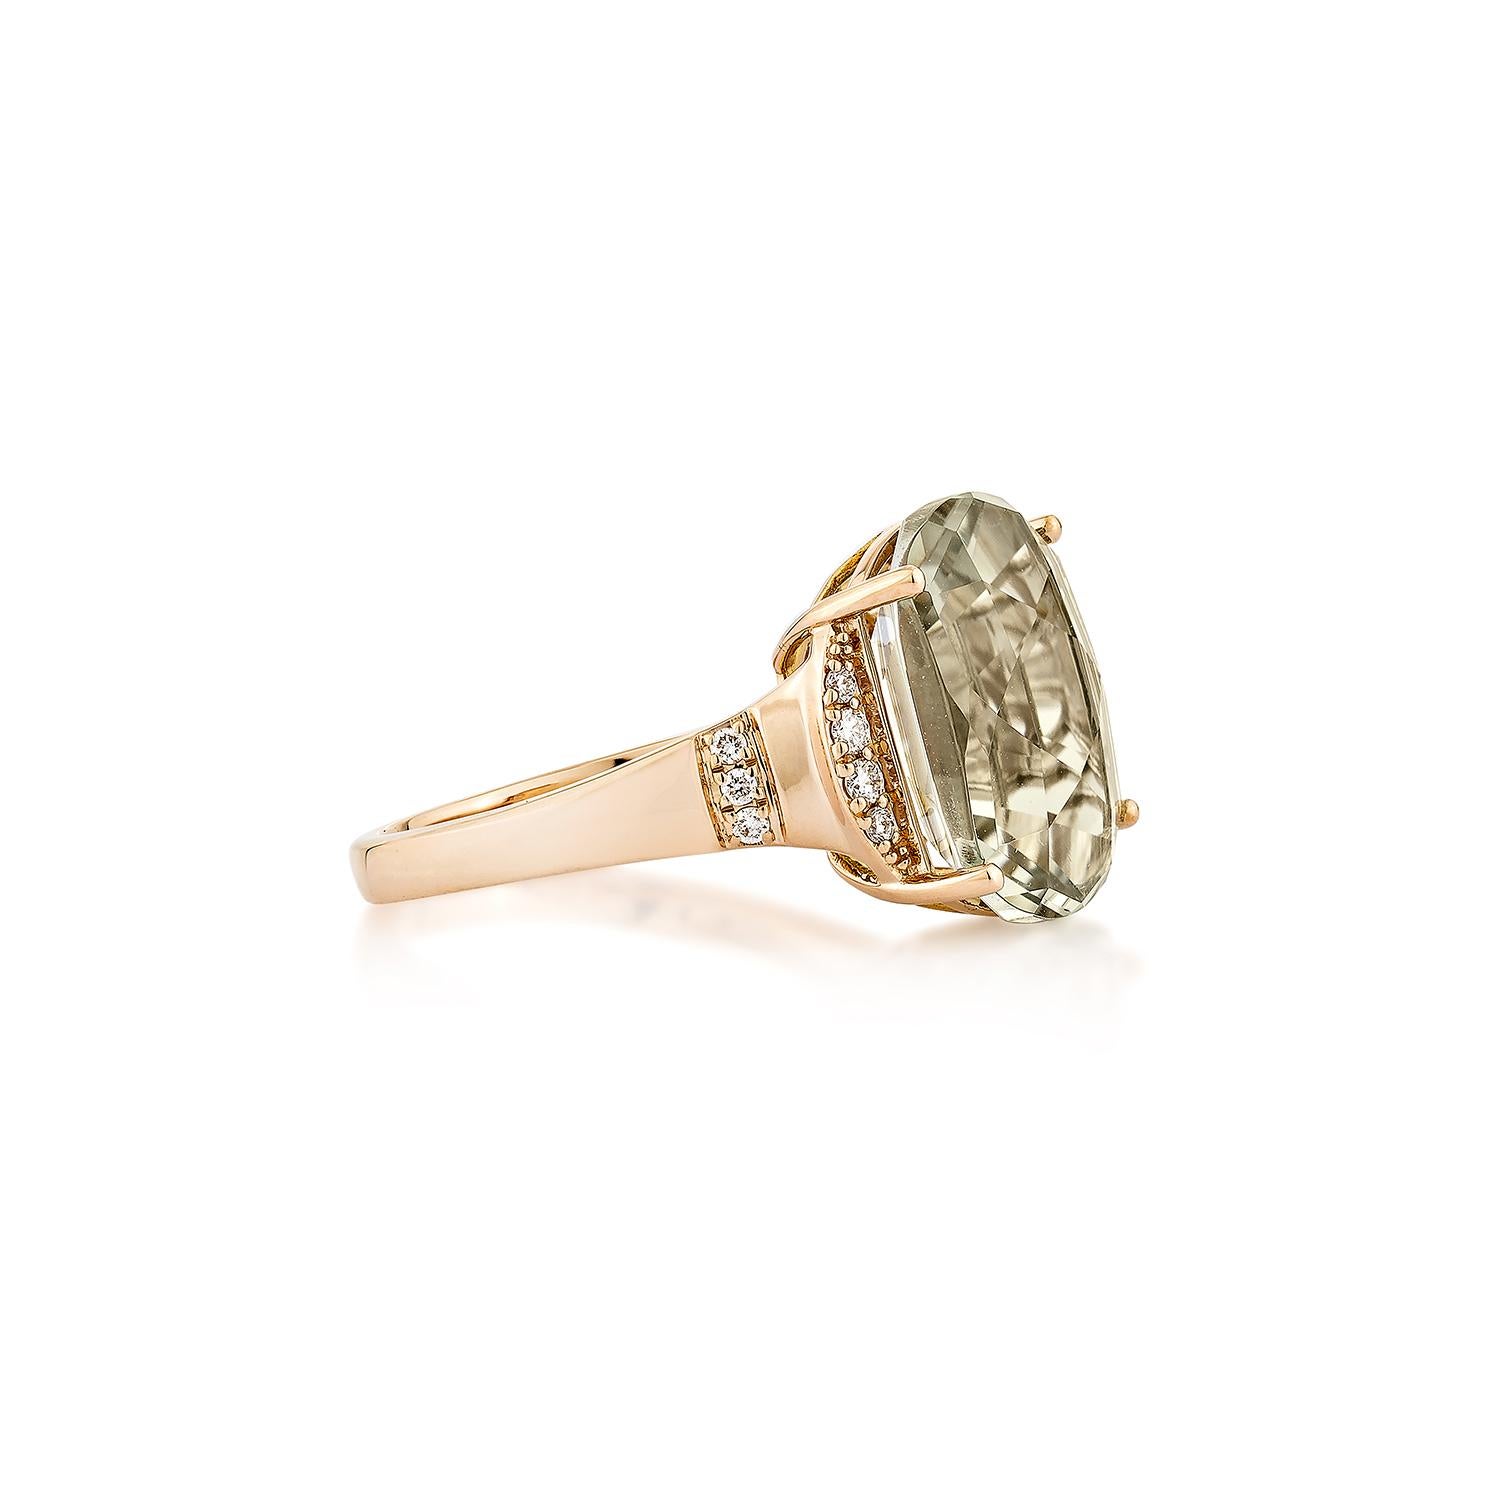 Introducing a new ring style that embodies luxury, fashion, and personal flair. These rings symbolize success, love, and importance. The collection has antique rings. They contain exquisite gems like Swiss blue topaz, mint quartz, and citrine. A